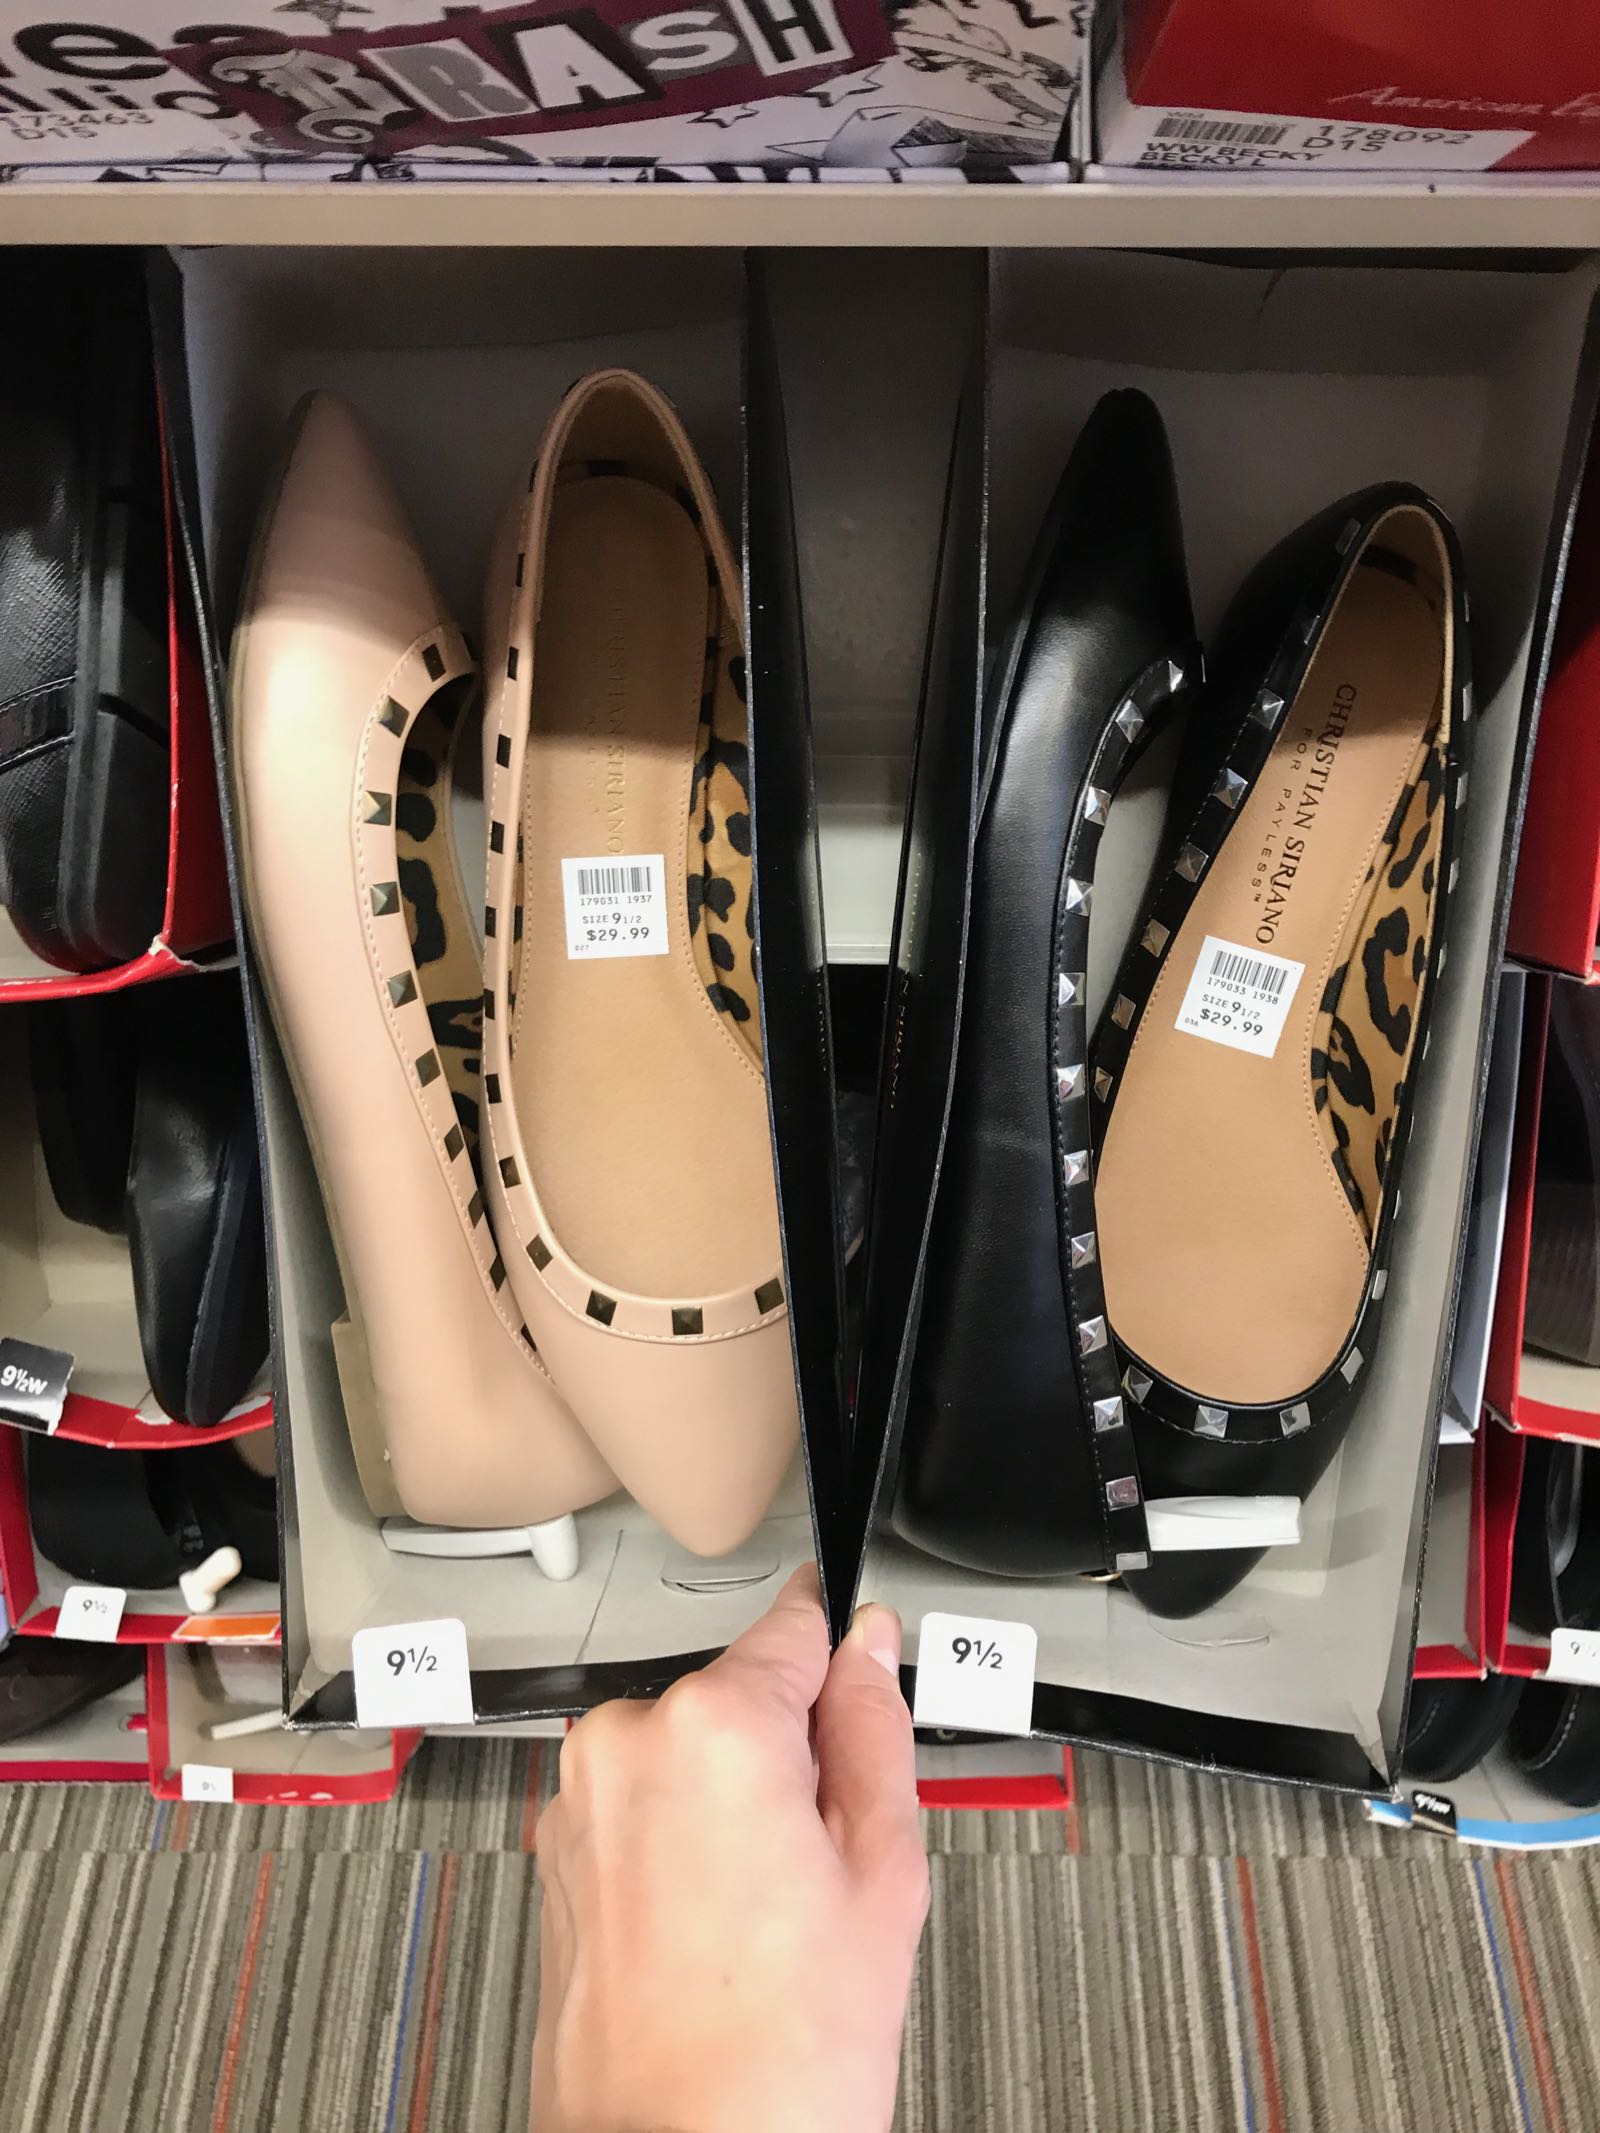 Payless has the cutest shoes and boots this winter!